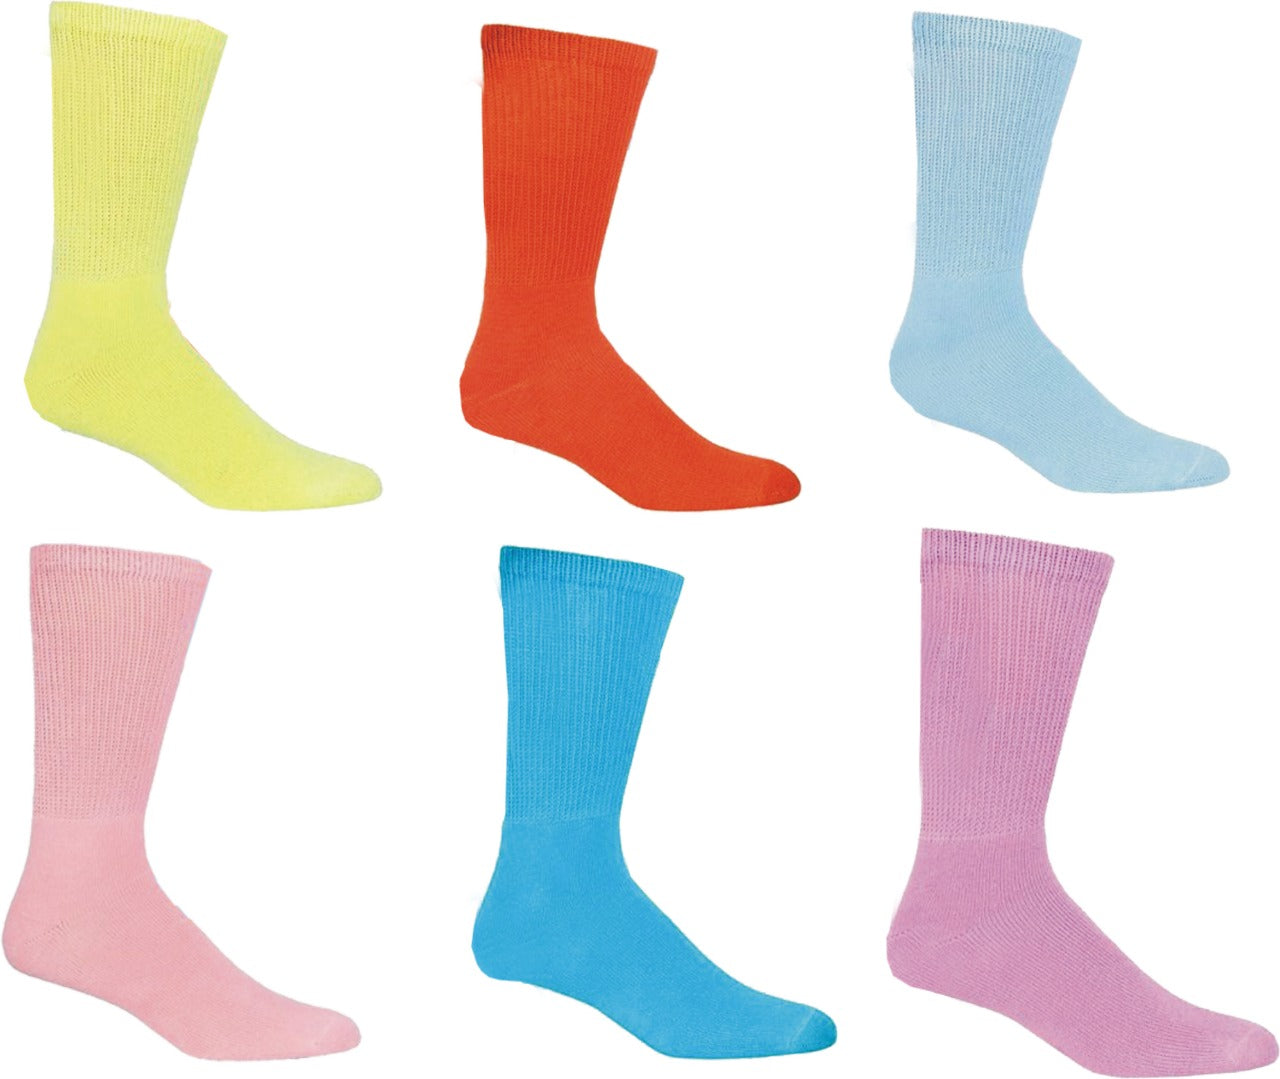 Diamond Star Diabetic Socks Combed Cotton Women's Crew Socks Health Circulatory Physicians Approved Non Binding Top 6 Pack 9-11 Mixed Color